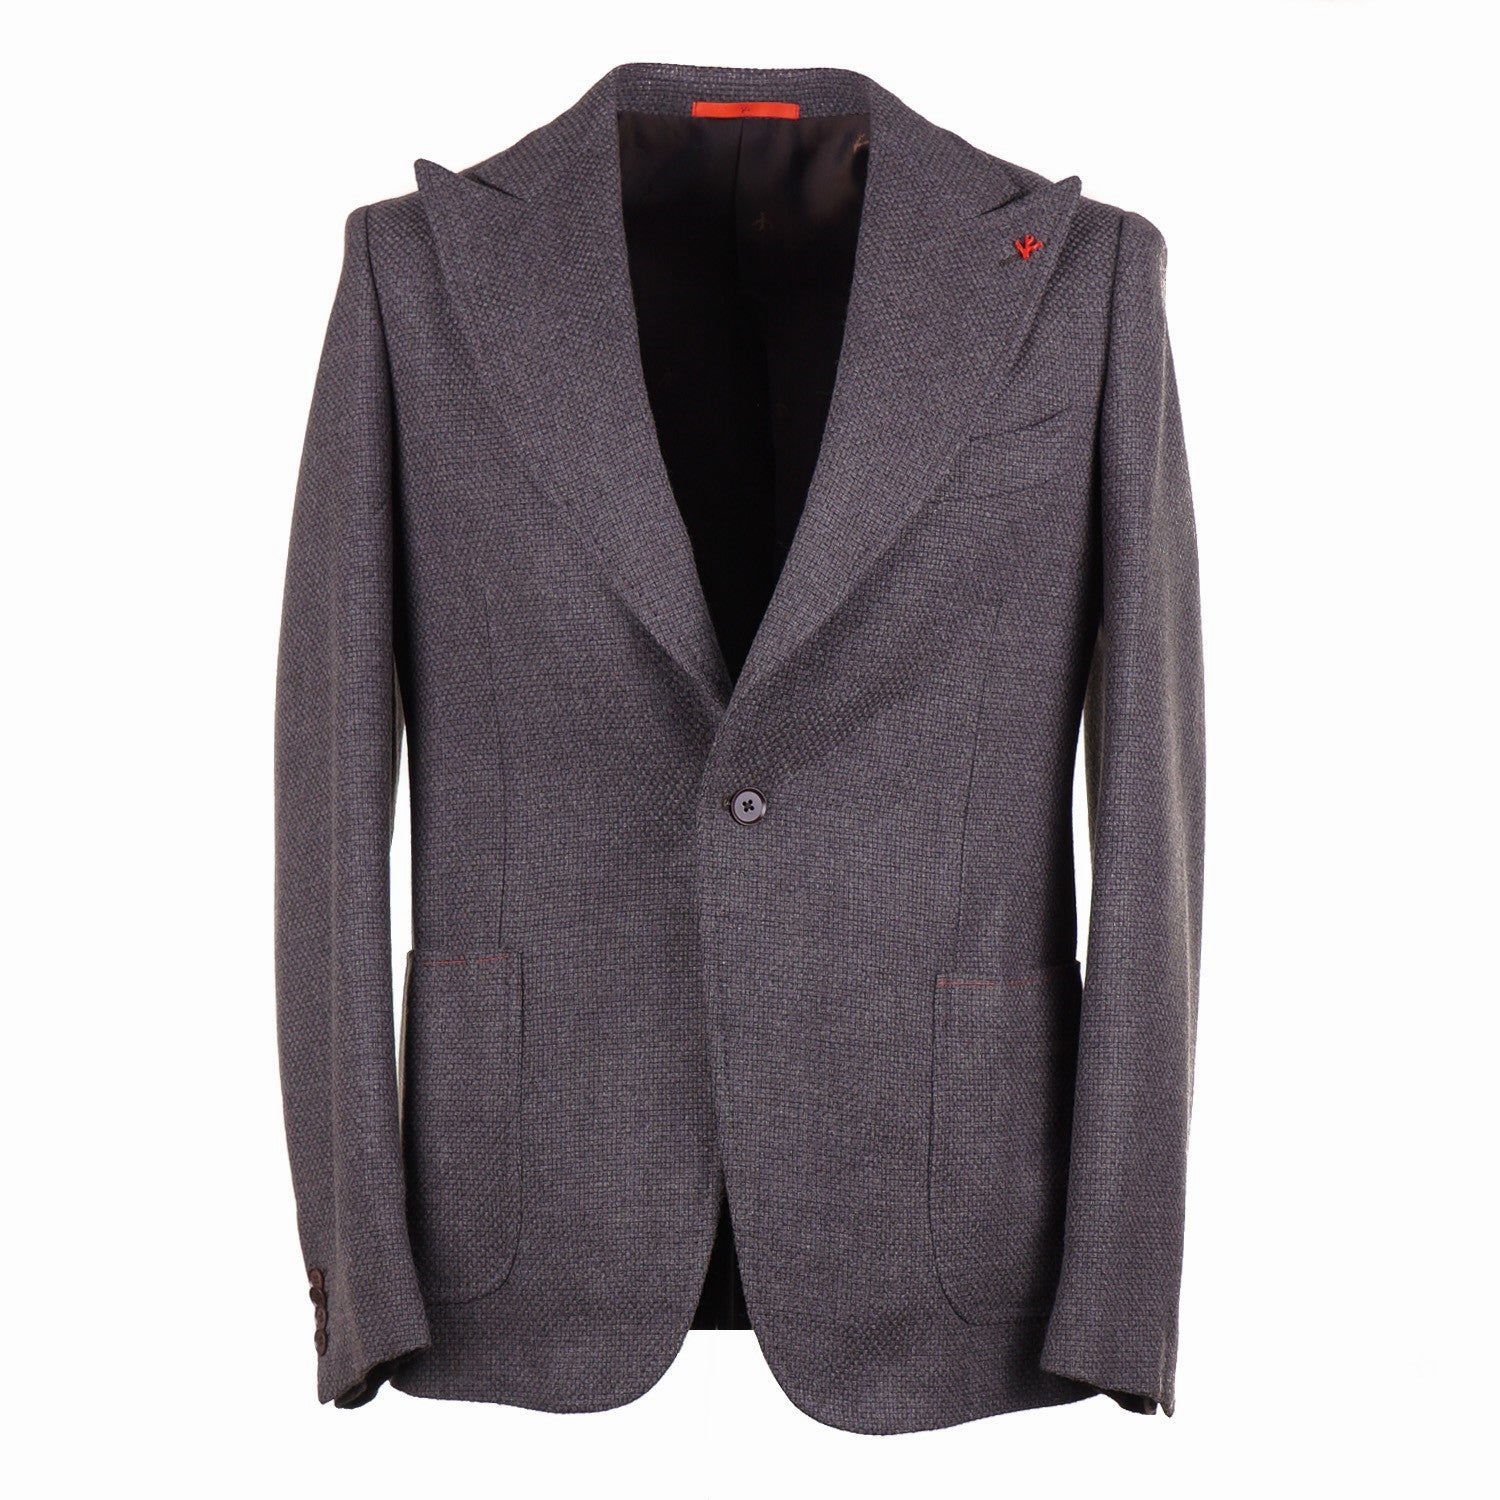 Isaia Trim-Fit Wool and Cashmere Sport Coat - Top Shelf Apparel